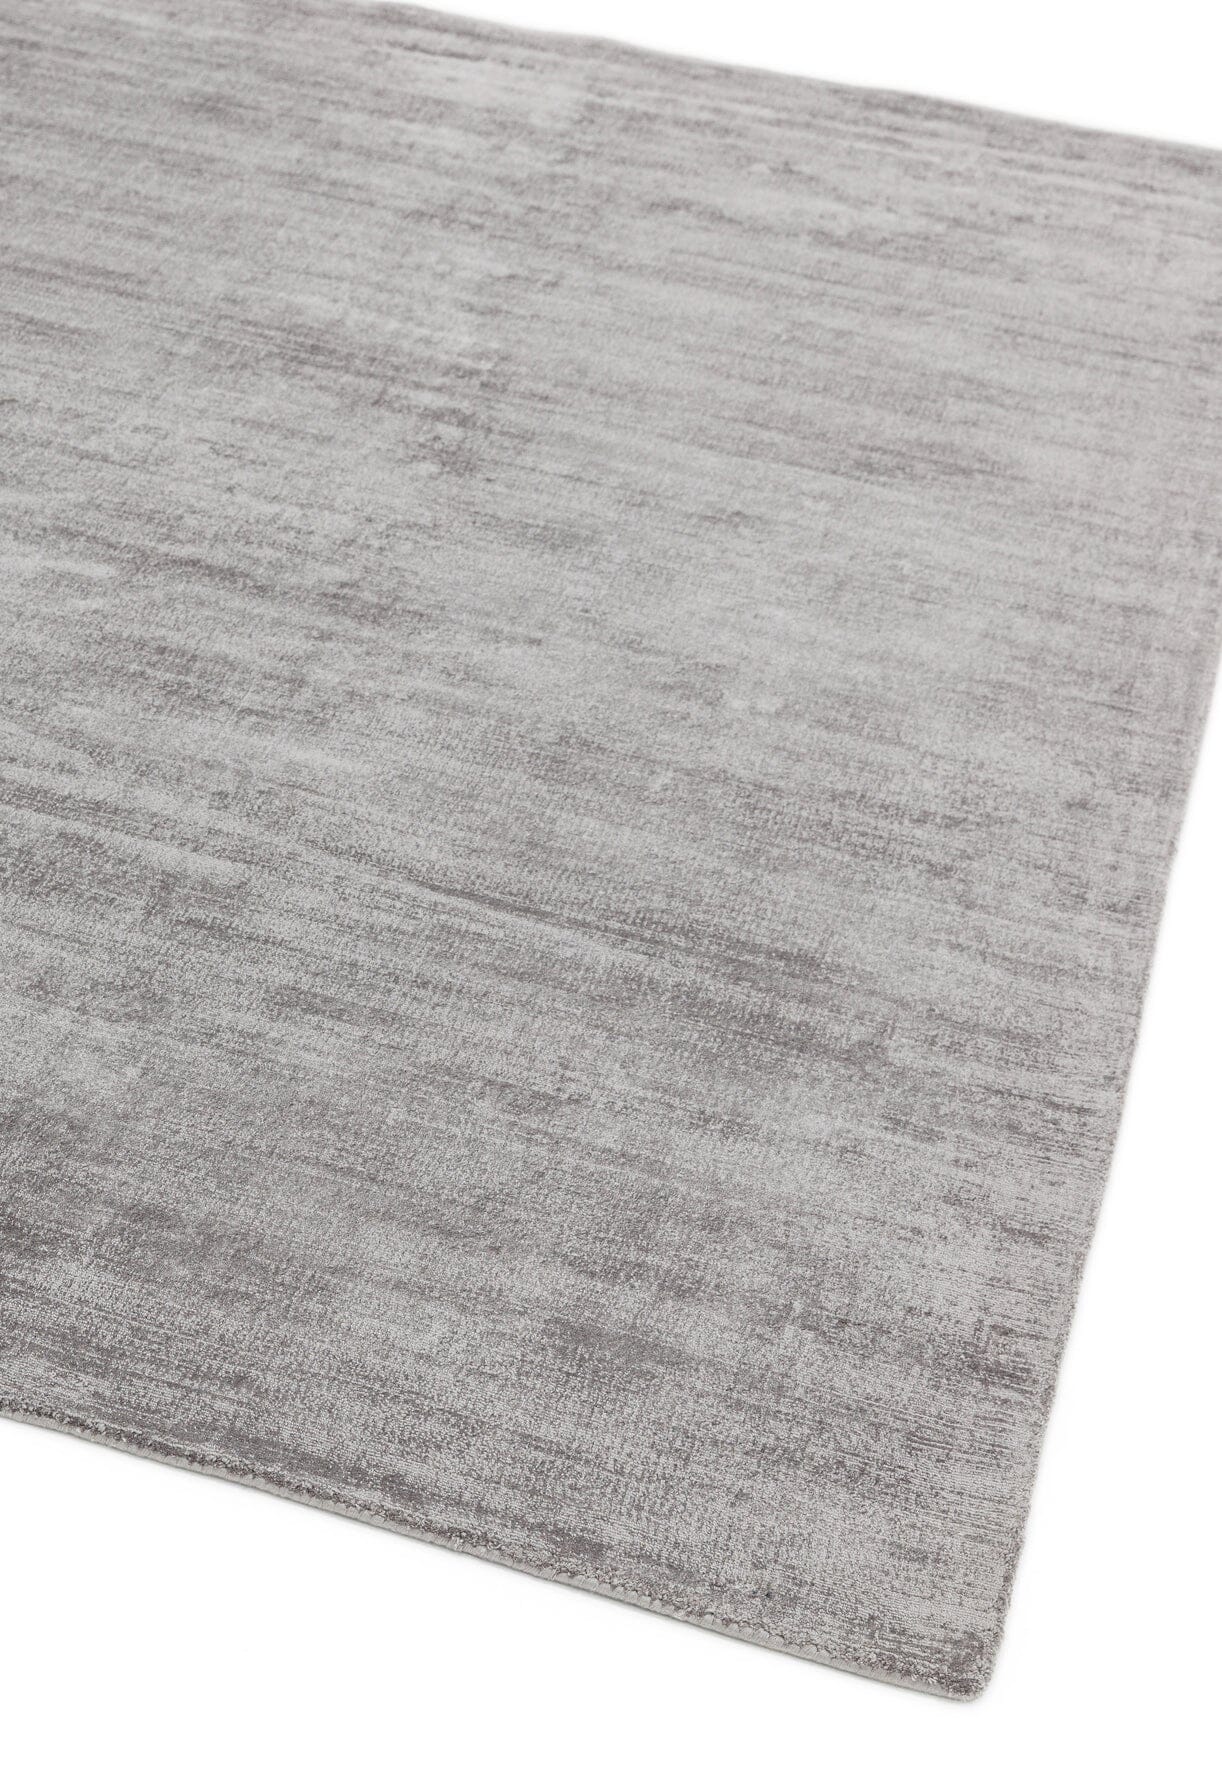  Asiatic Carpets-Asiatic Carpets Blade Hand Woven Runner Silver - 66 x 240cm-Grey, Silver 269 